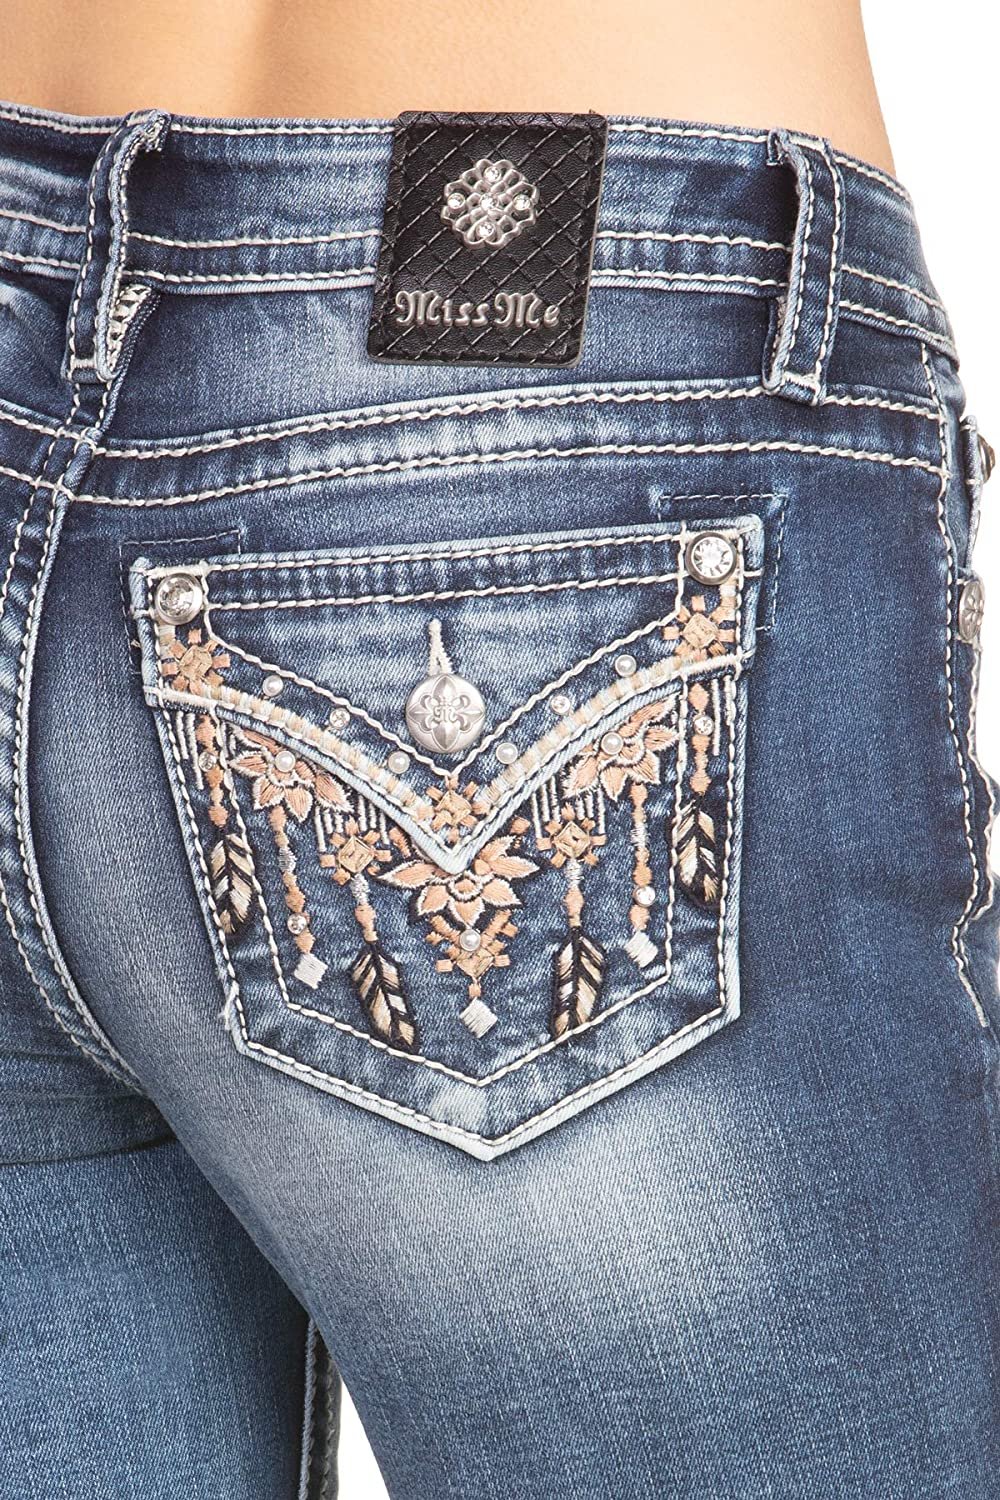 Miss Me Women's Mid-Rise Boot Cut Jeans with Pink Floral Fringe ...